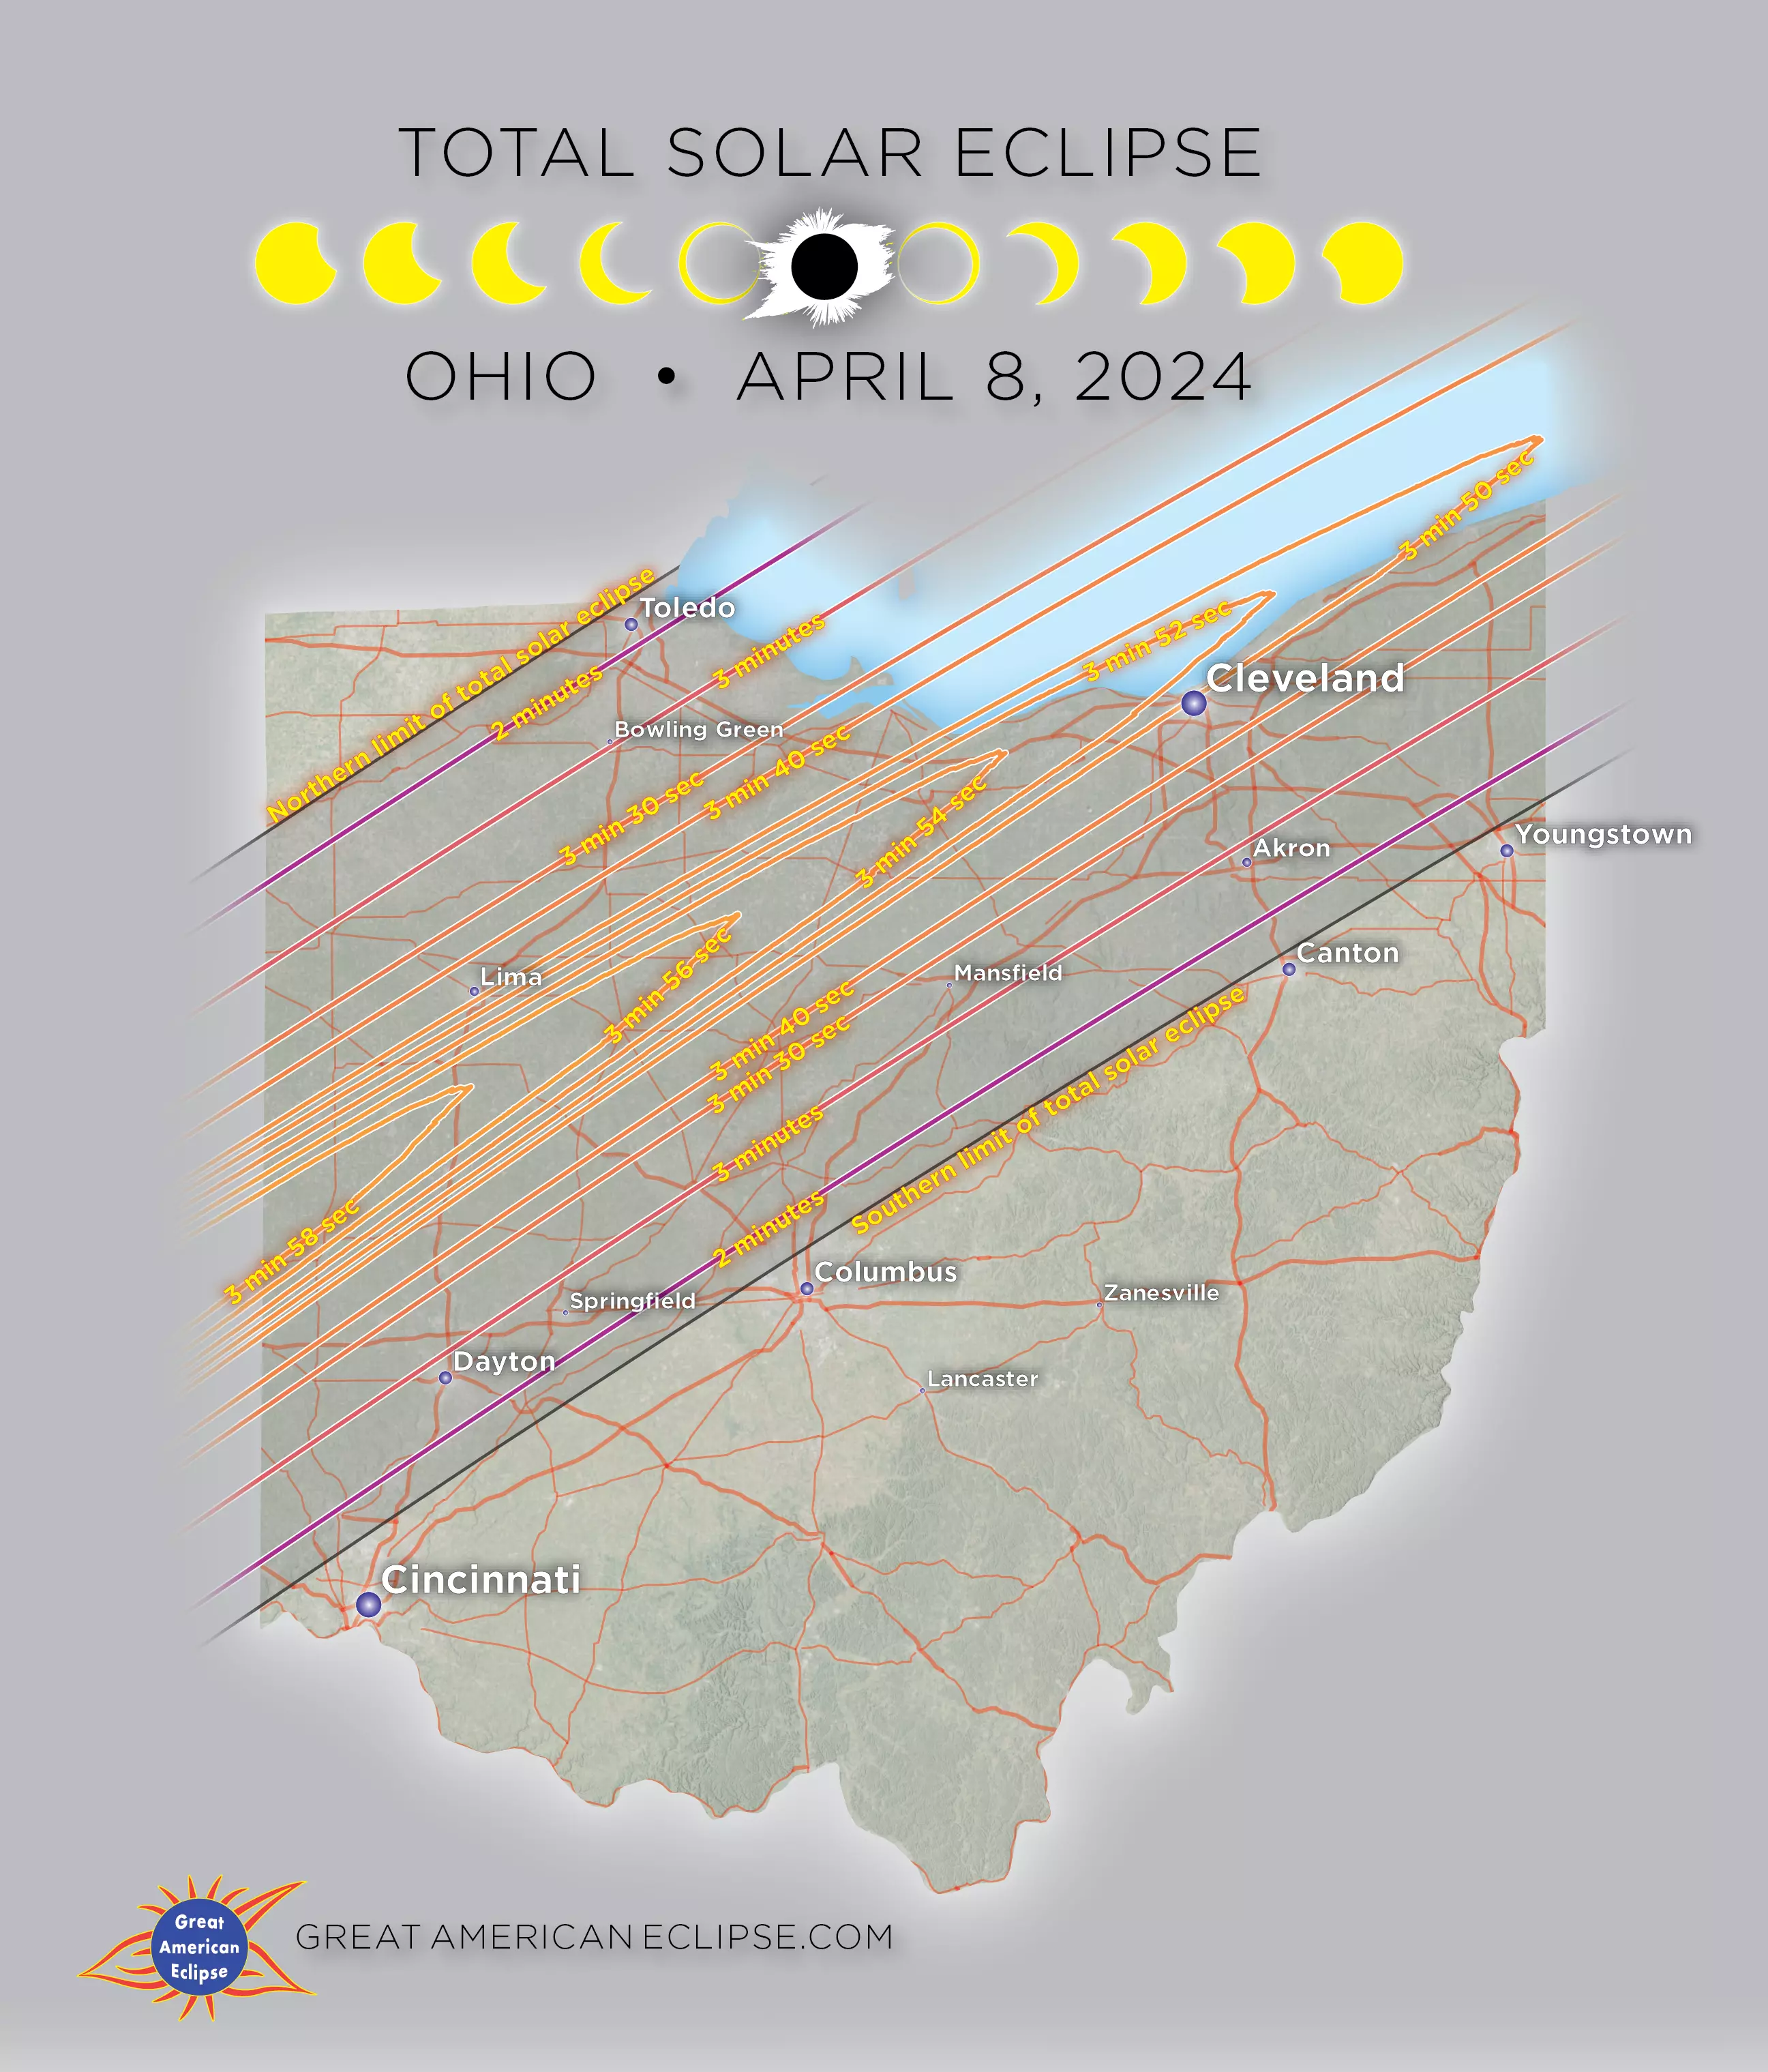 Total solar eclipse in Ohio in 2024 Public events and camping options